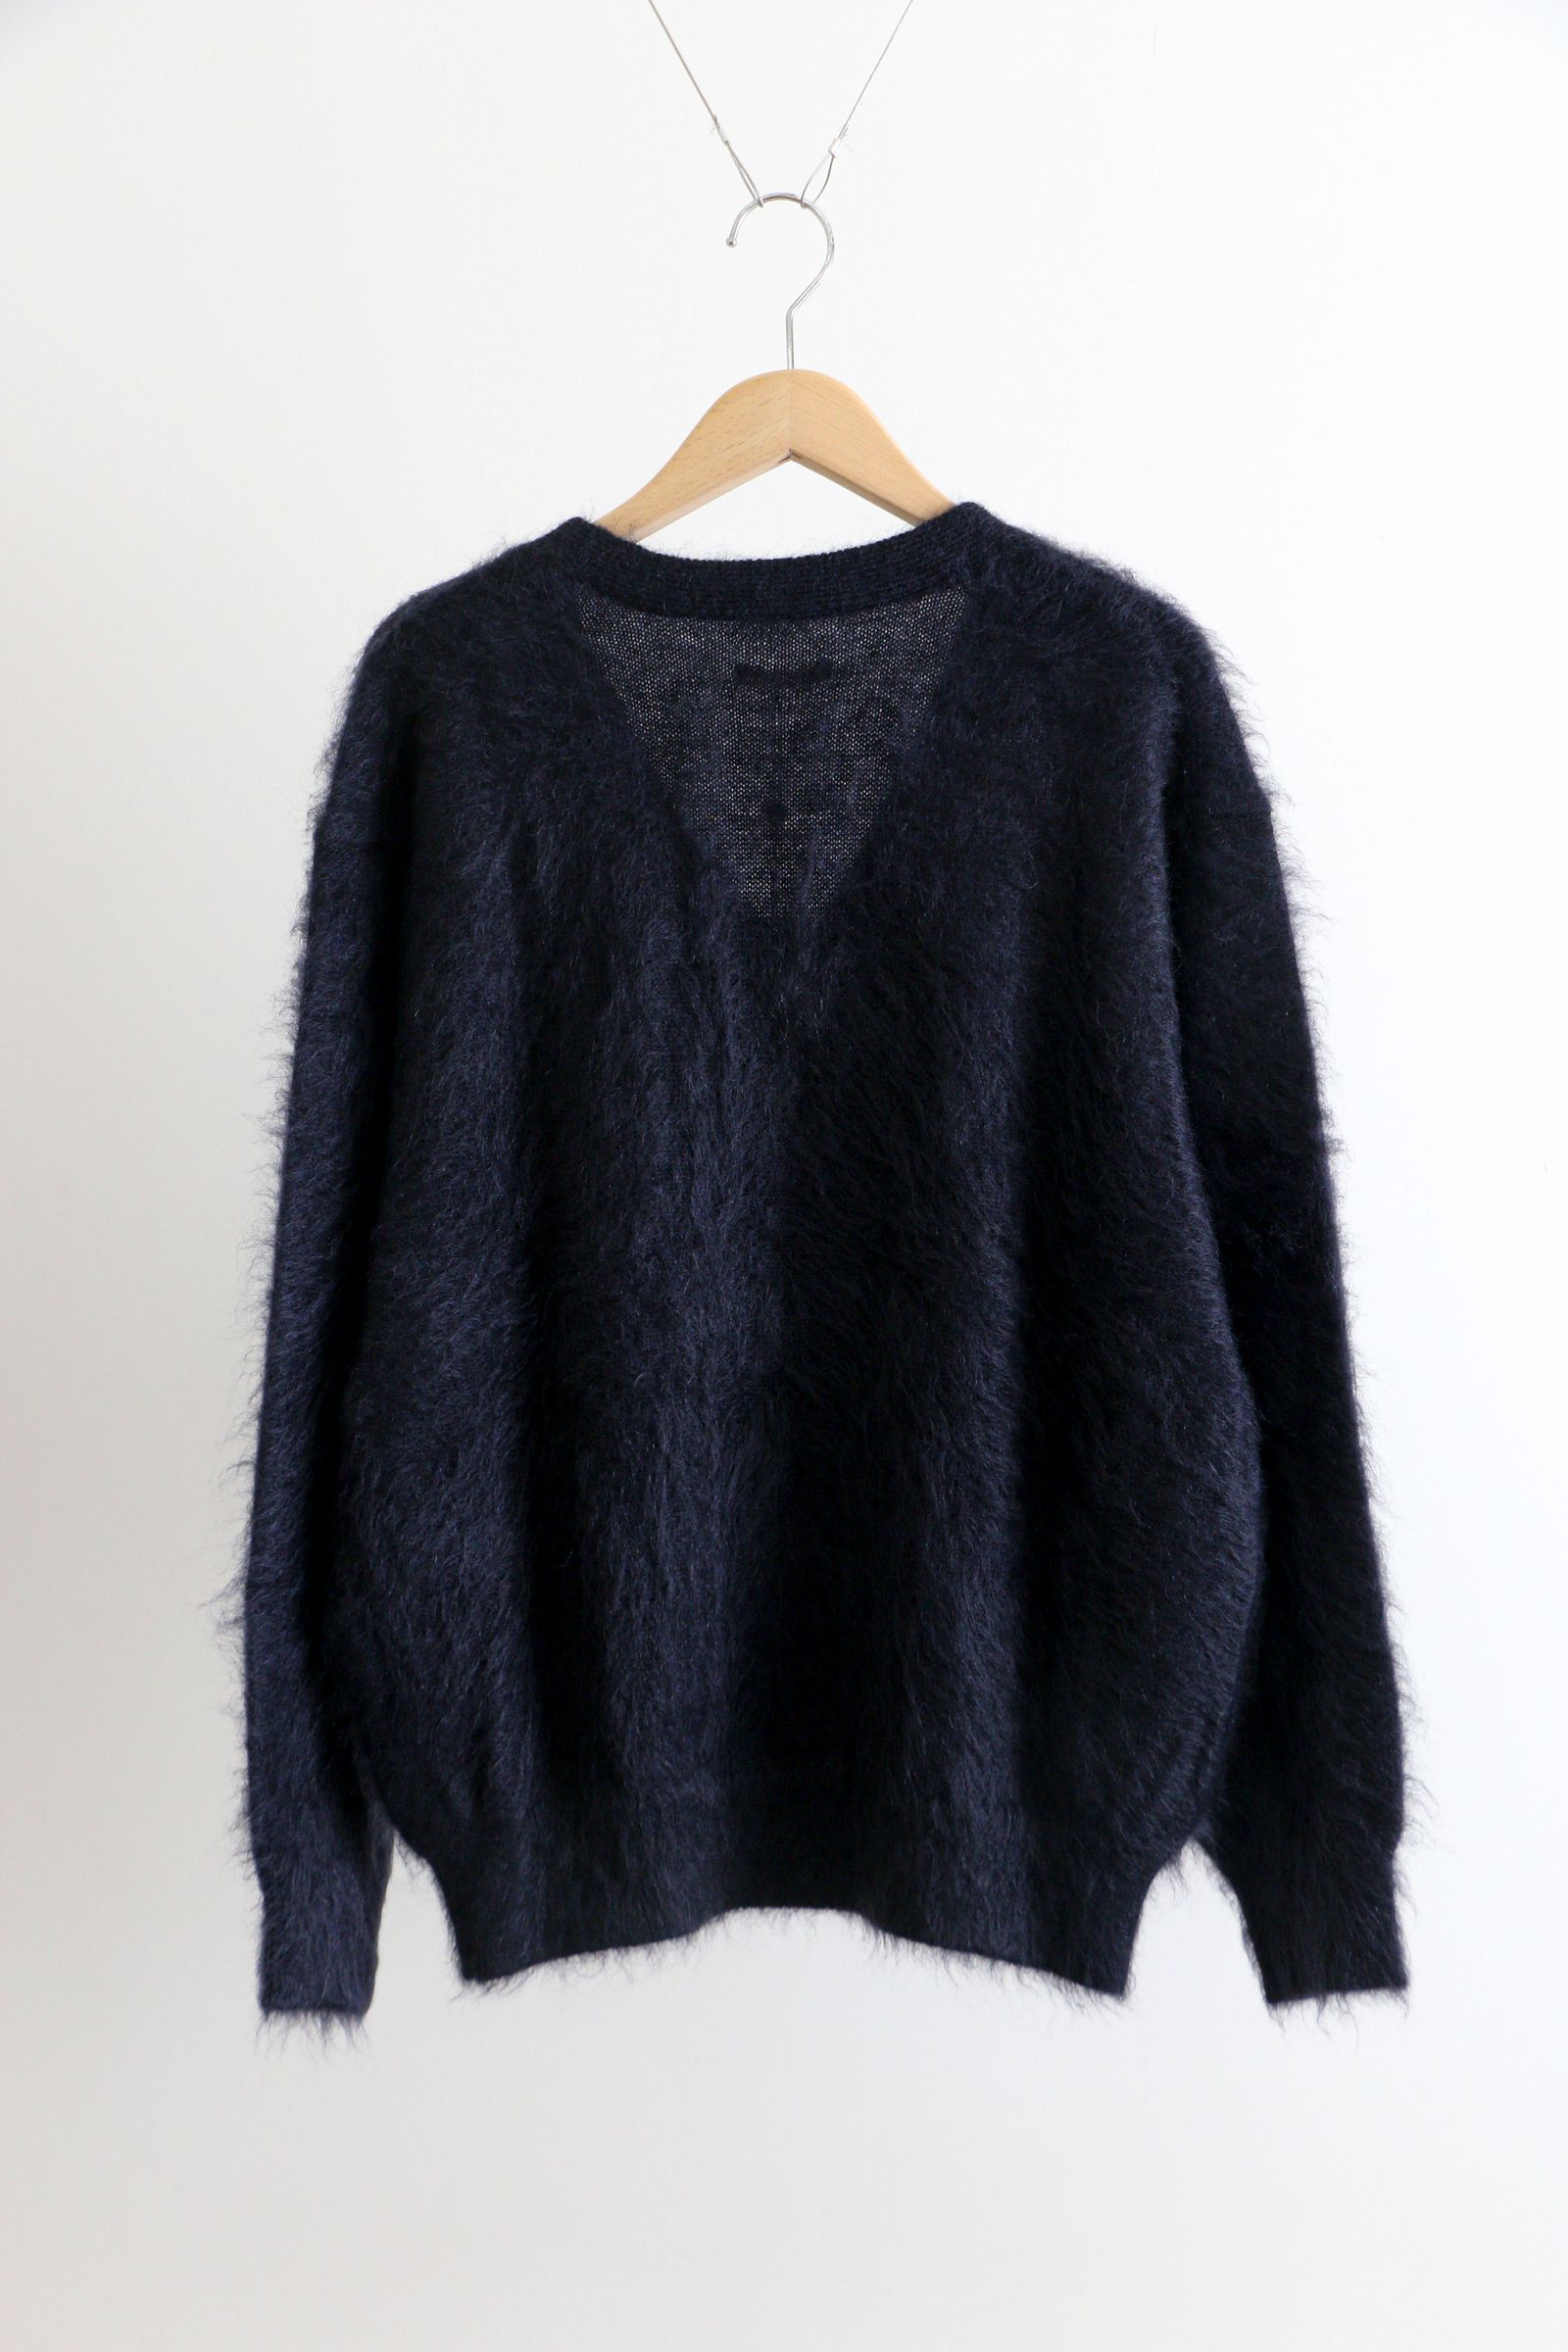 UNIVERSAL PRODUCTS - MOHAIR CREW NECK SWEATER D.NAVY / モヘア